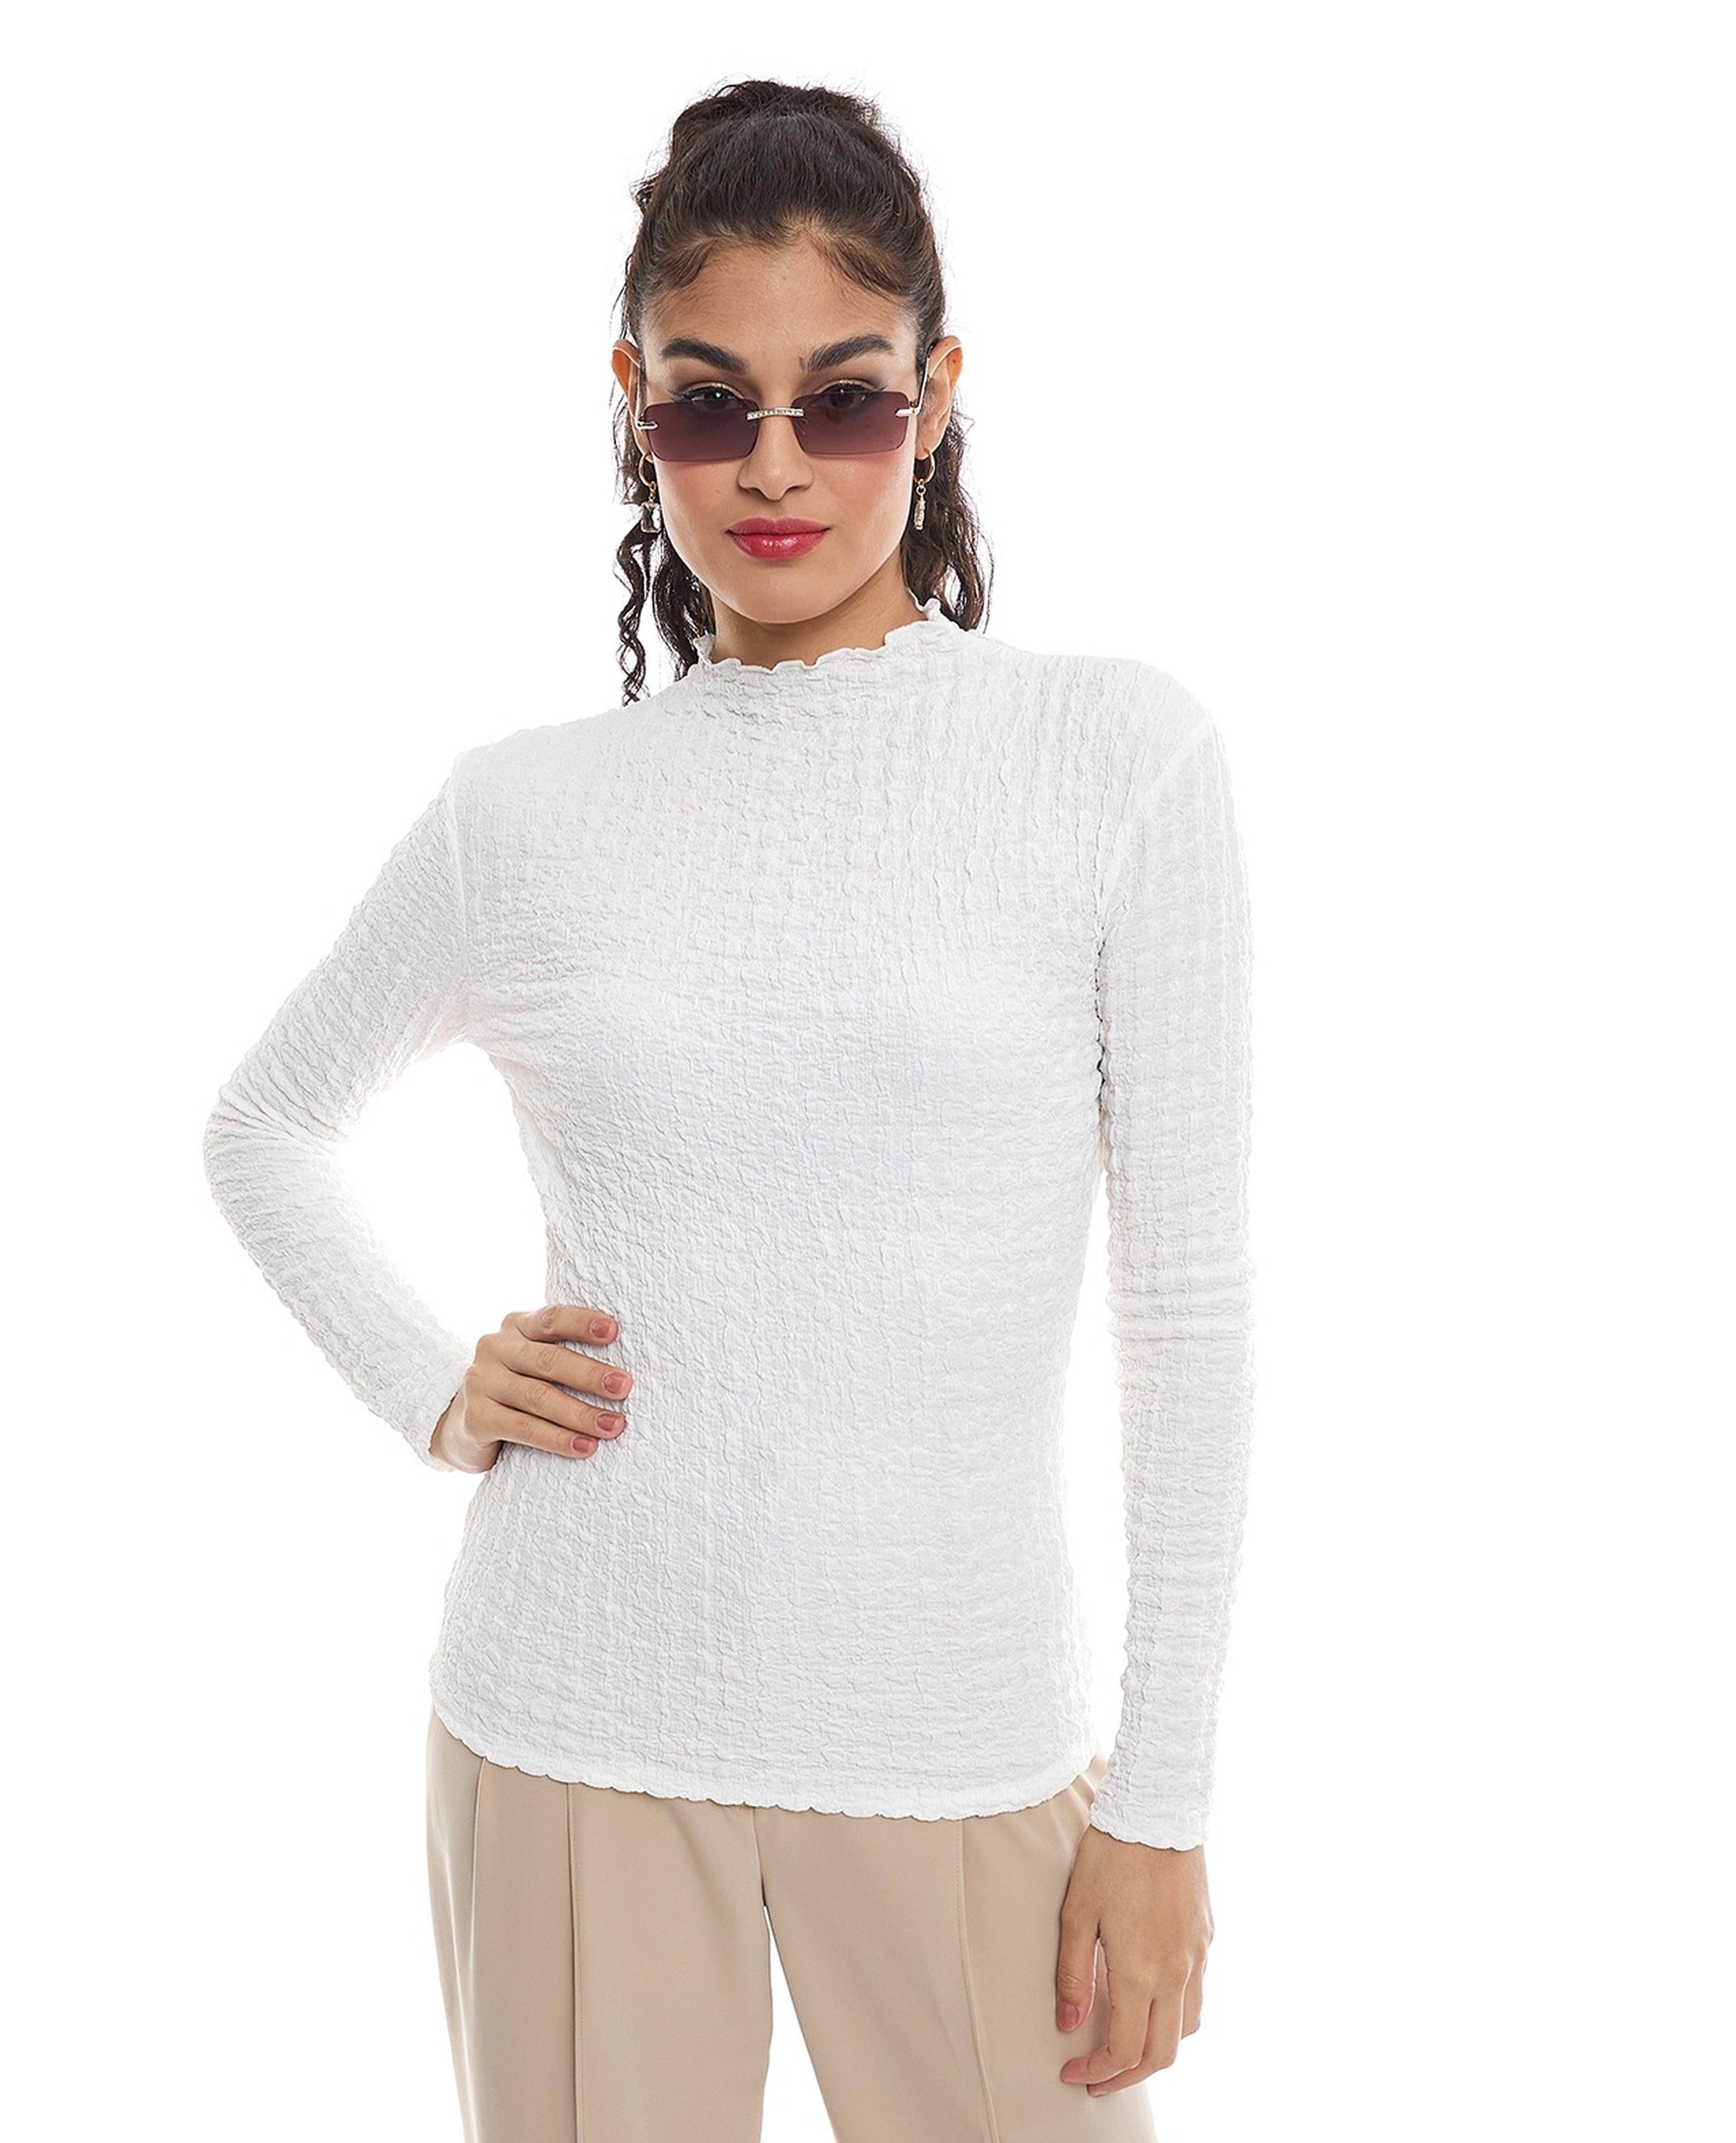 Textured Top with High Neck and Long Sleeves